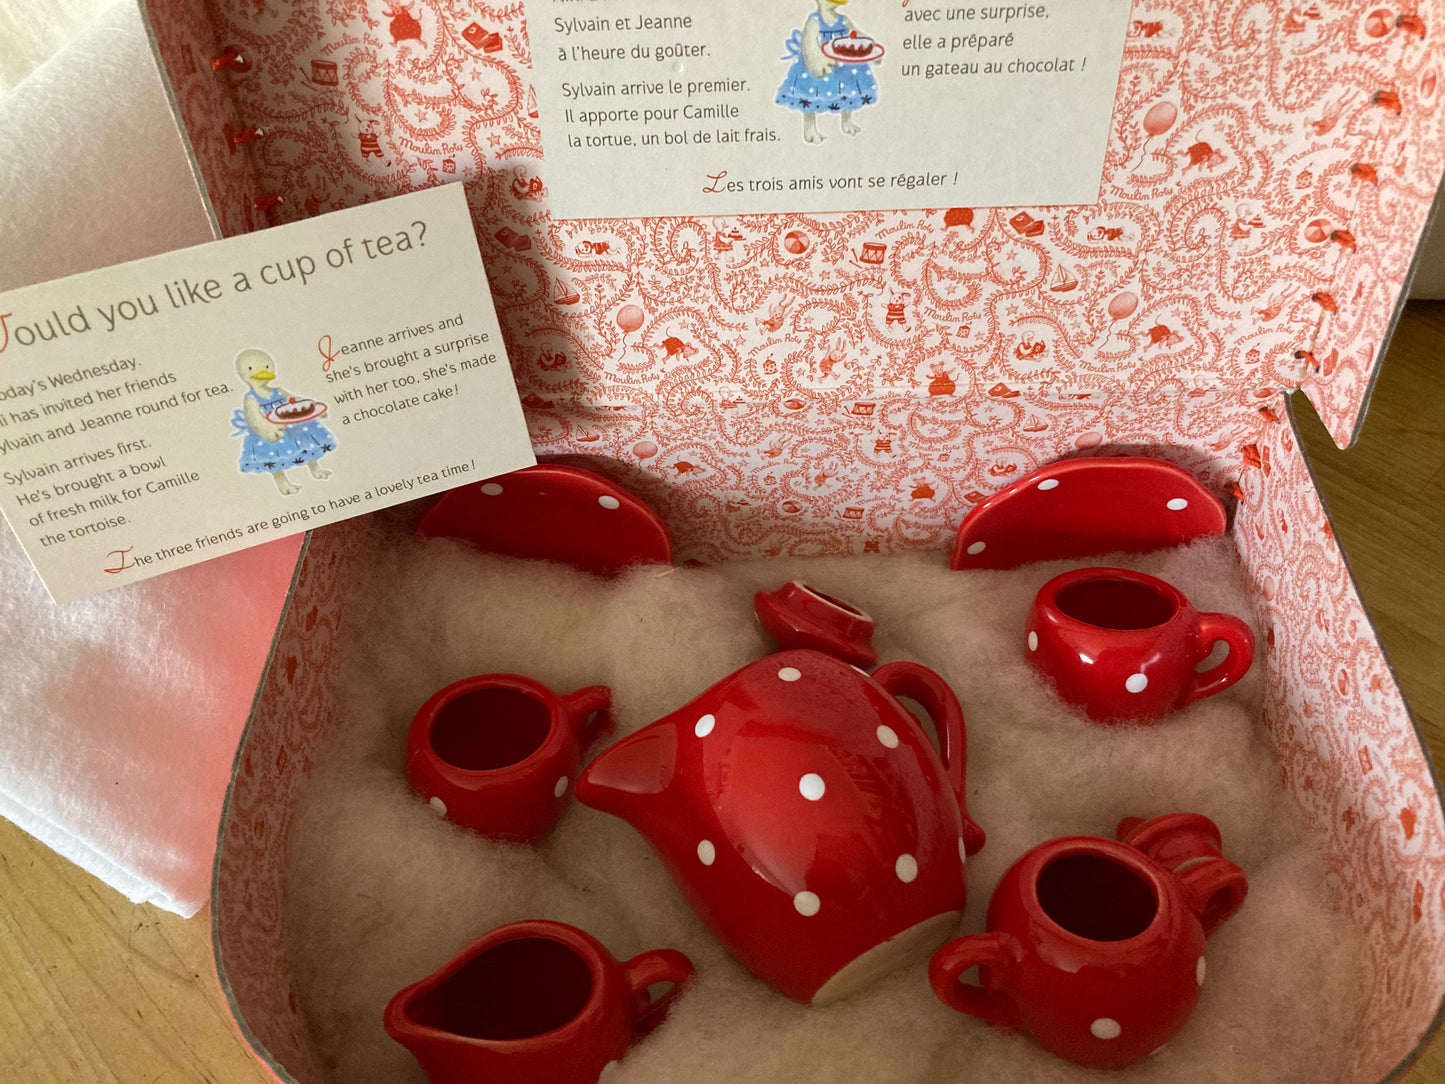 Keeping House - RED CERAMIC TEA SERVICE for TWO